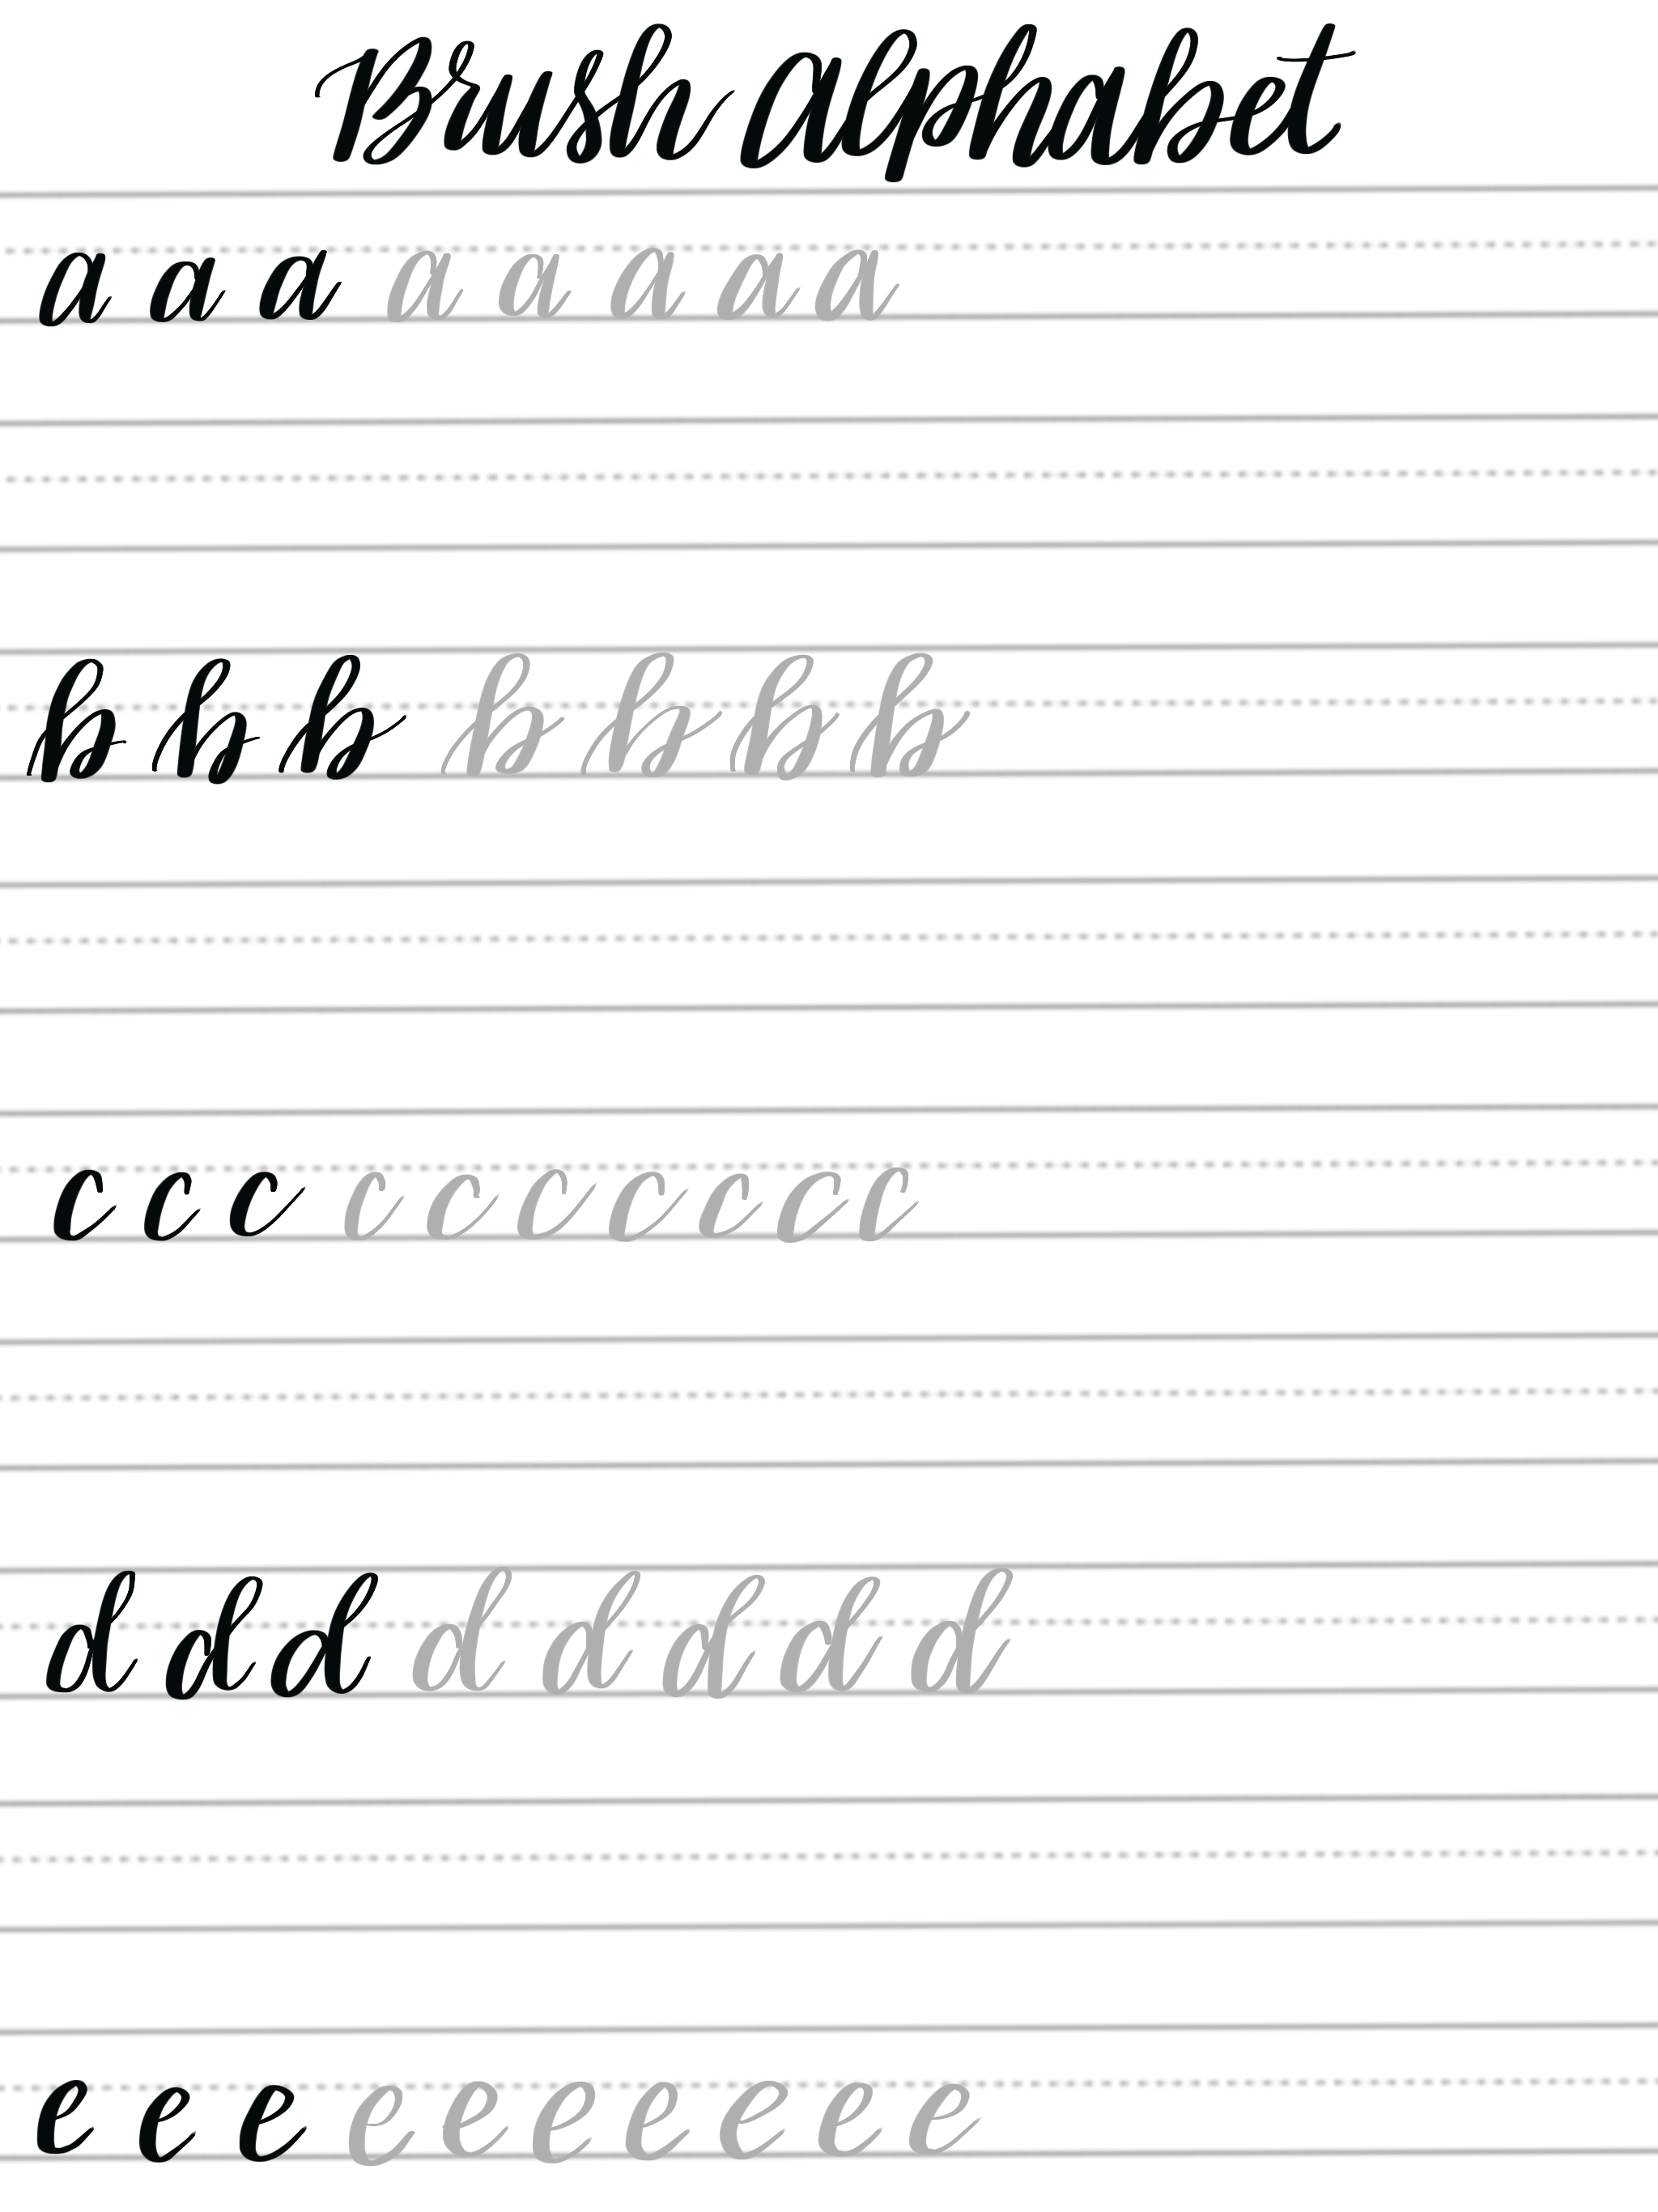 Free Brush Lettering Practice Sheets Lowercase Alphabet Brush Lettering Practice Hand Lettering Worksheet Lettering Practice